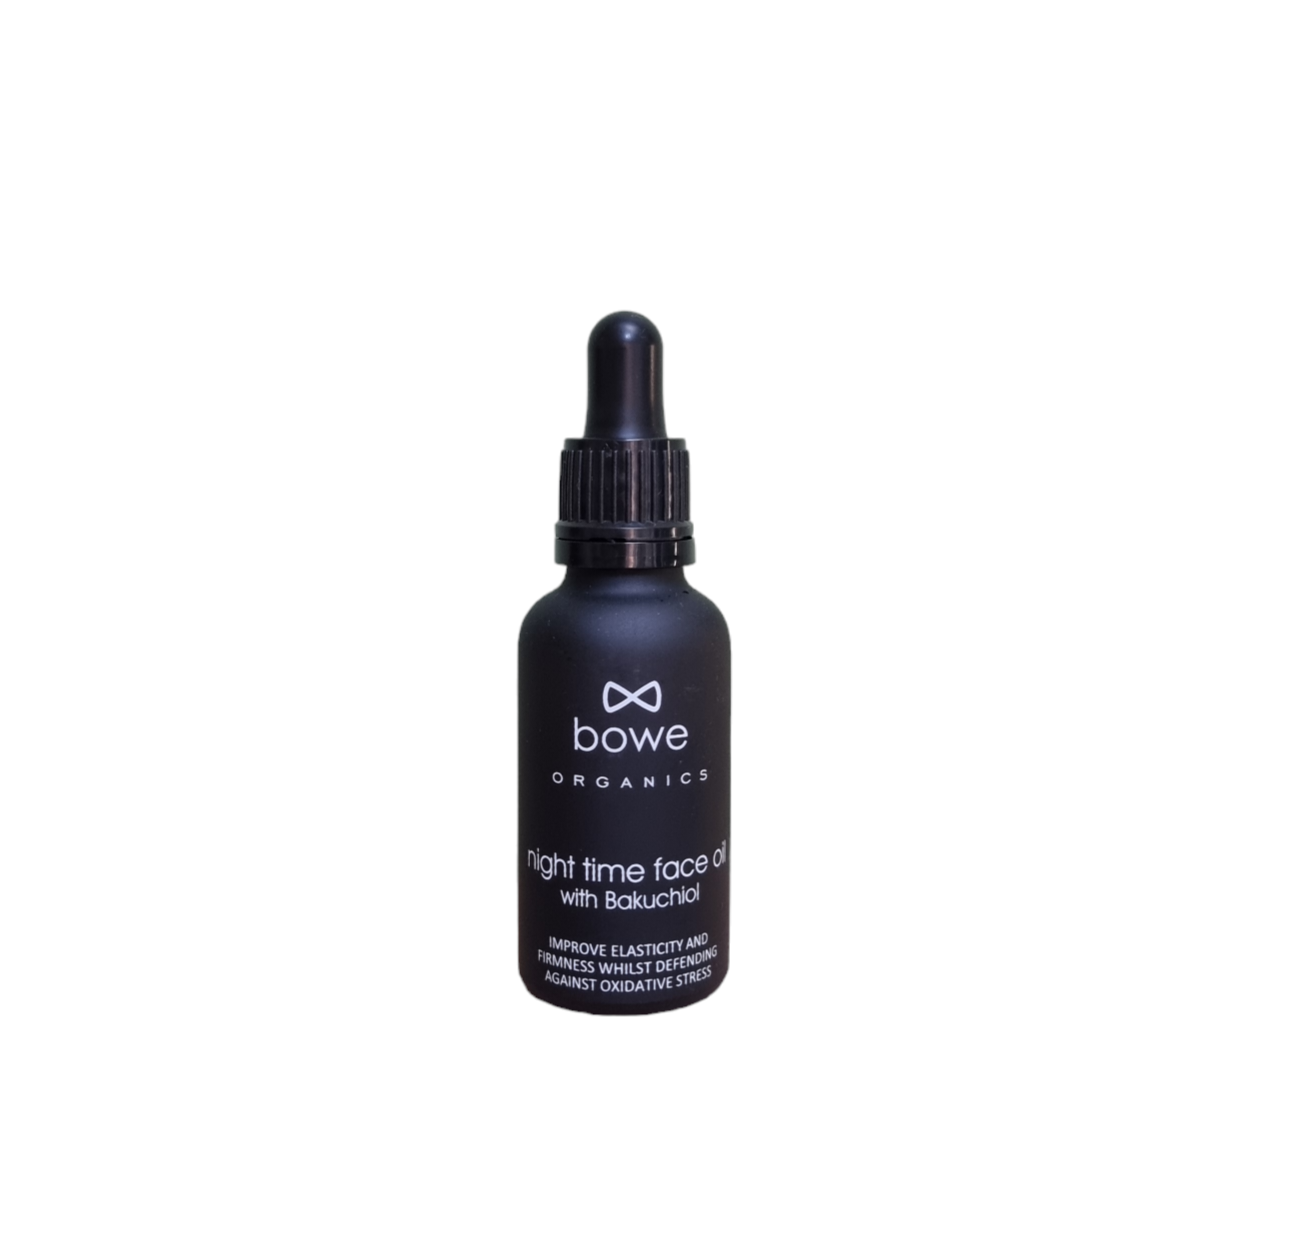 night time face oil made with bakuchiol bio retinol in a black frosted glass bottle and pipette. free from essential oils - naturally fragrance free